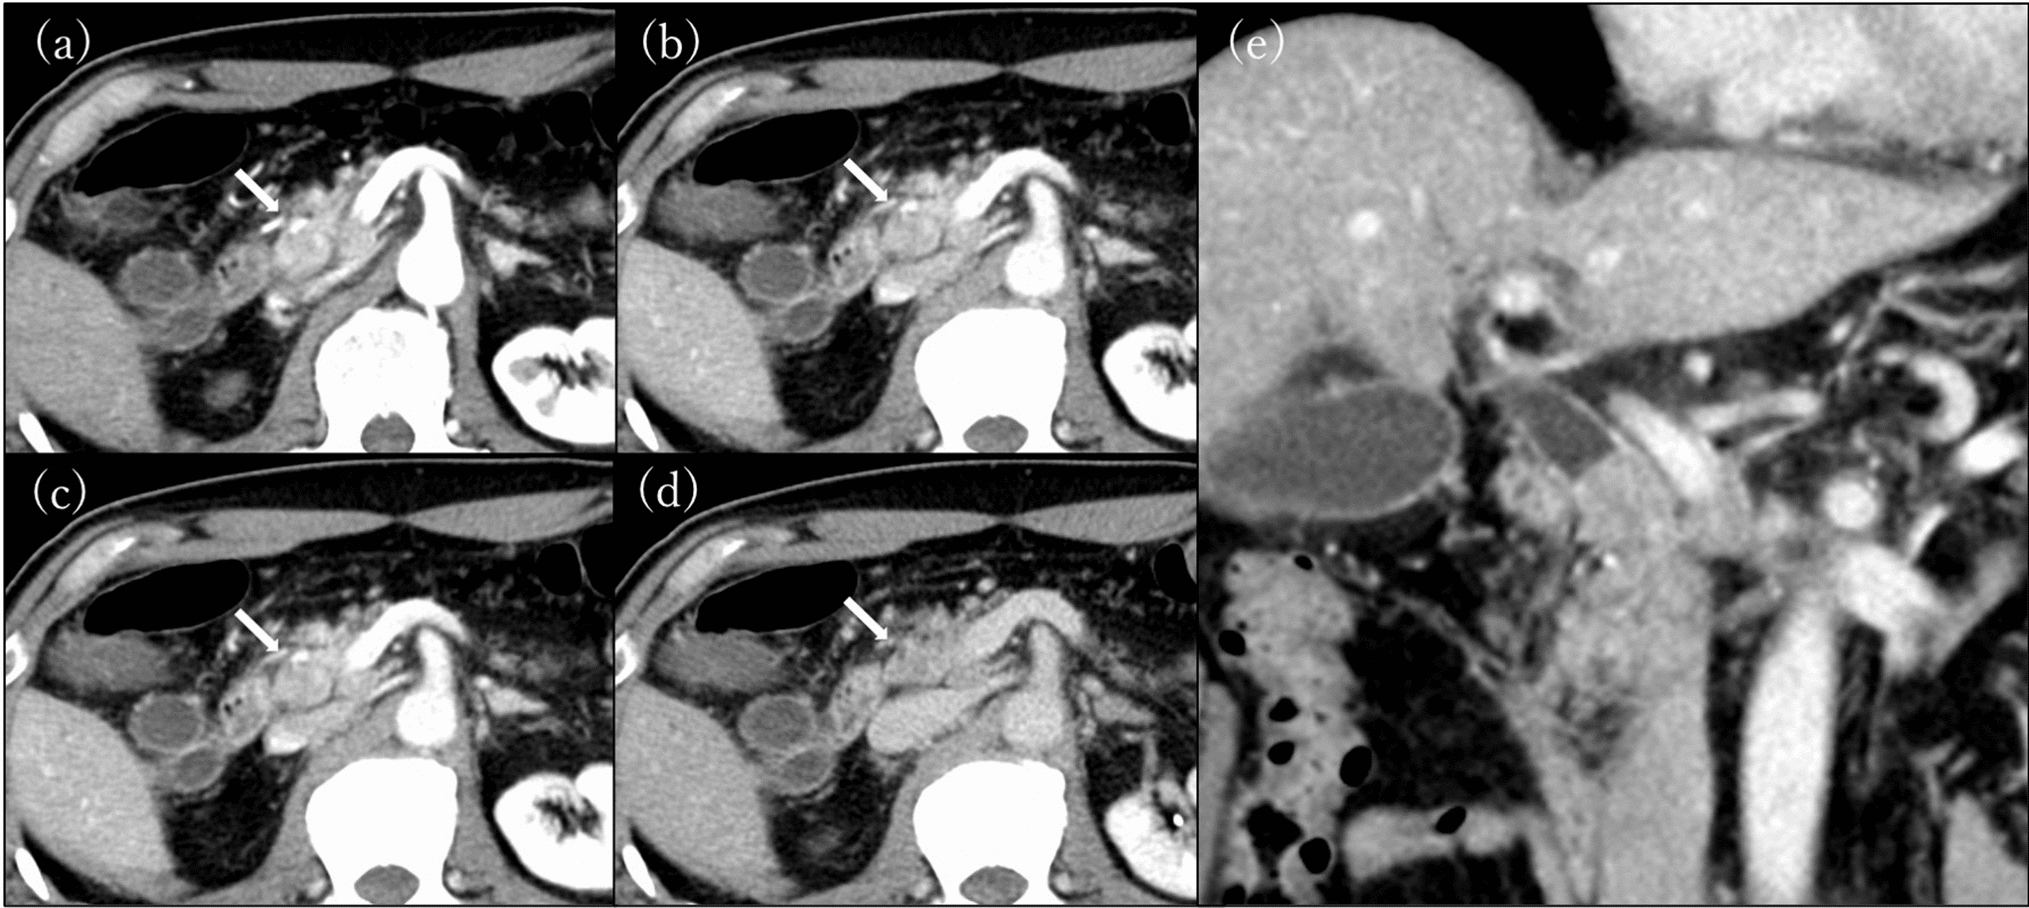 Mixed neuroendocrine–non-neuroendocrine neoplasm of the bile duct with long-term prognosis after neoadjuvant chemotherapy